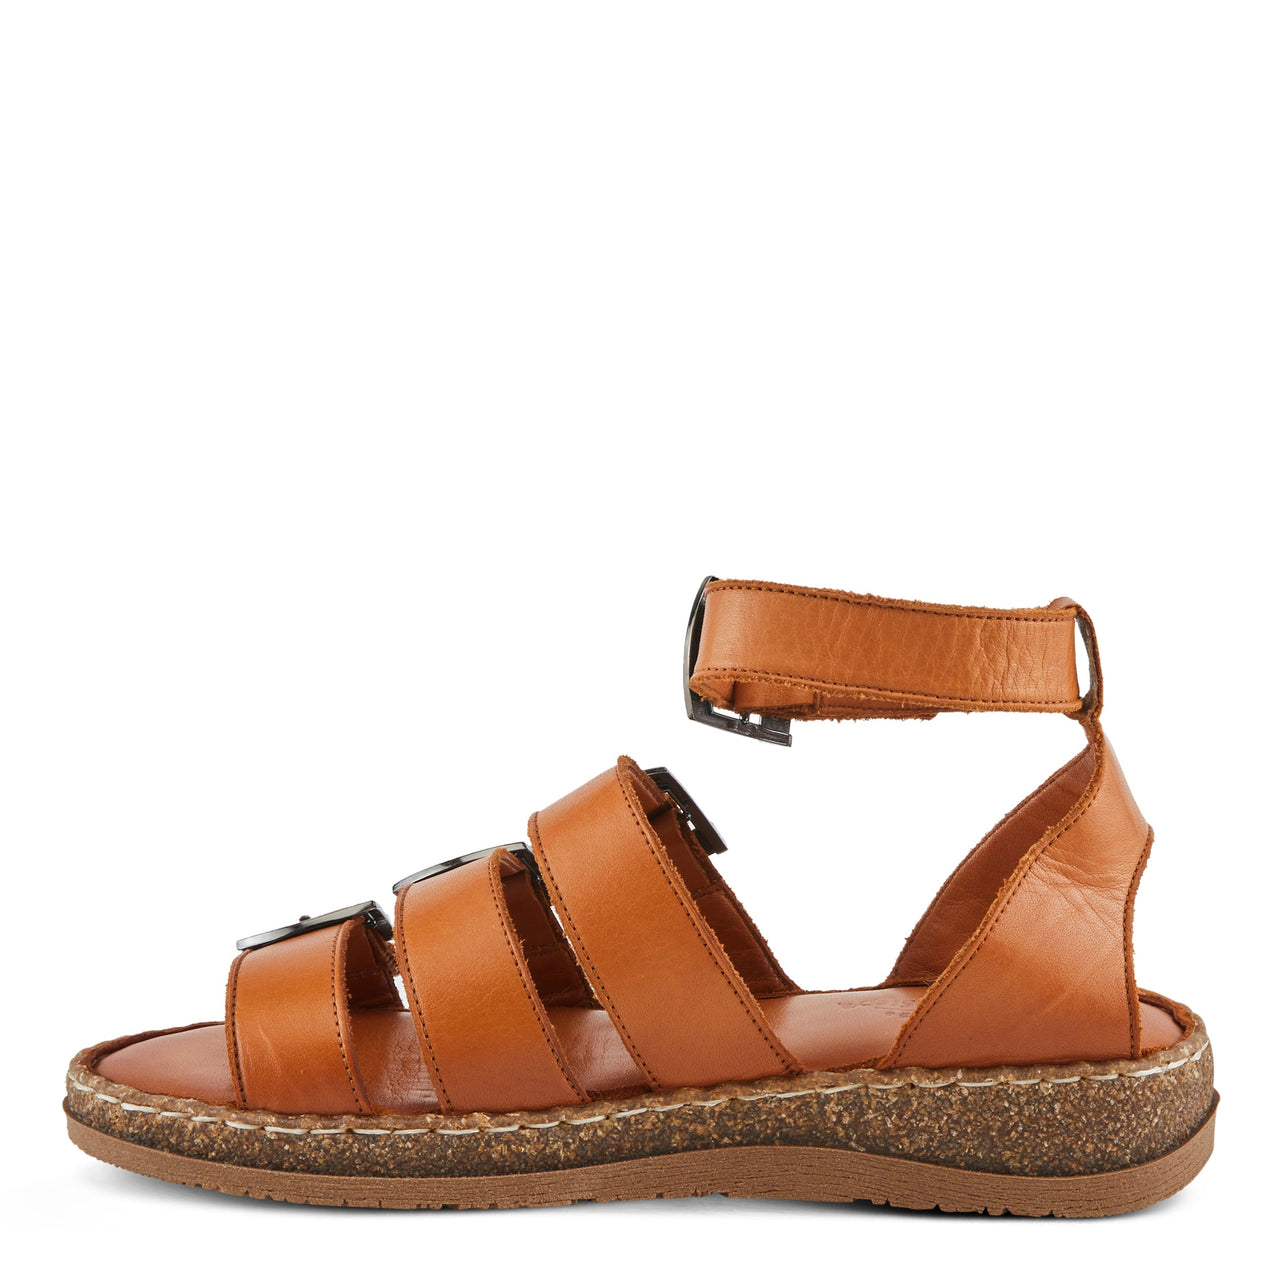 Stylish and comfortable Spring Step Alexcia Sandals with adjustable straps and cushioned footbed for all-day wear